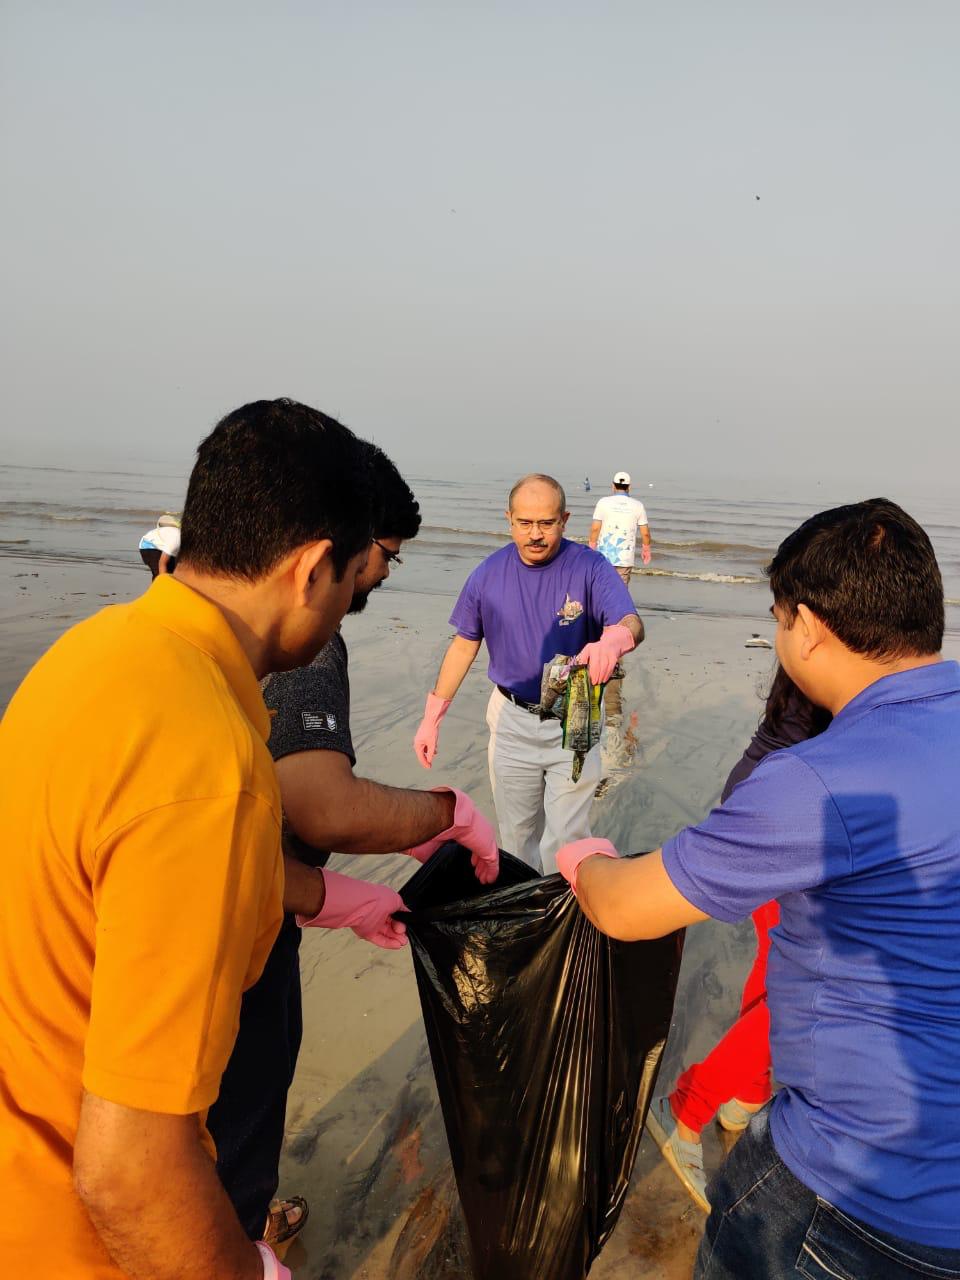 On the occasion of the 71st Republic Day, Export-Import Bank of India organized a beach clean-up drive at Juhu Beach Mumbai. Mr. David Rasquinha, Managing Director, Exim Bank, participated in the clean-up drive along with the employees of Exim Bank and their family members -Photo By GPN